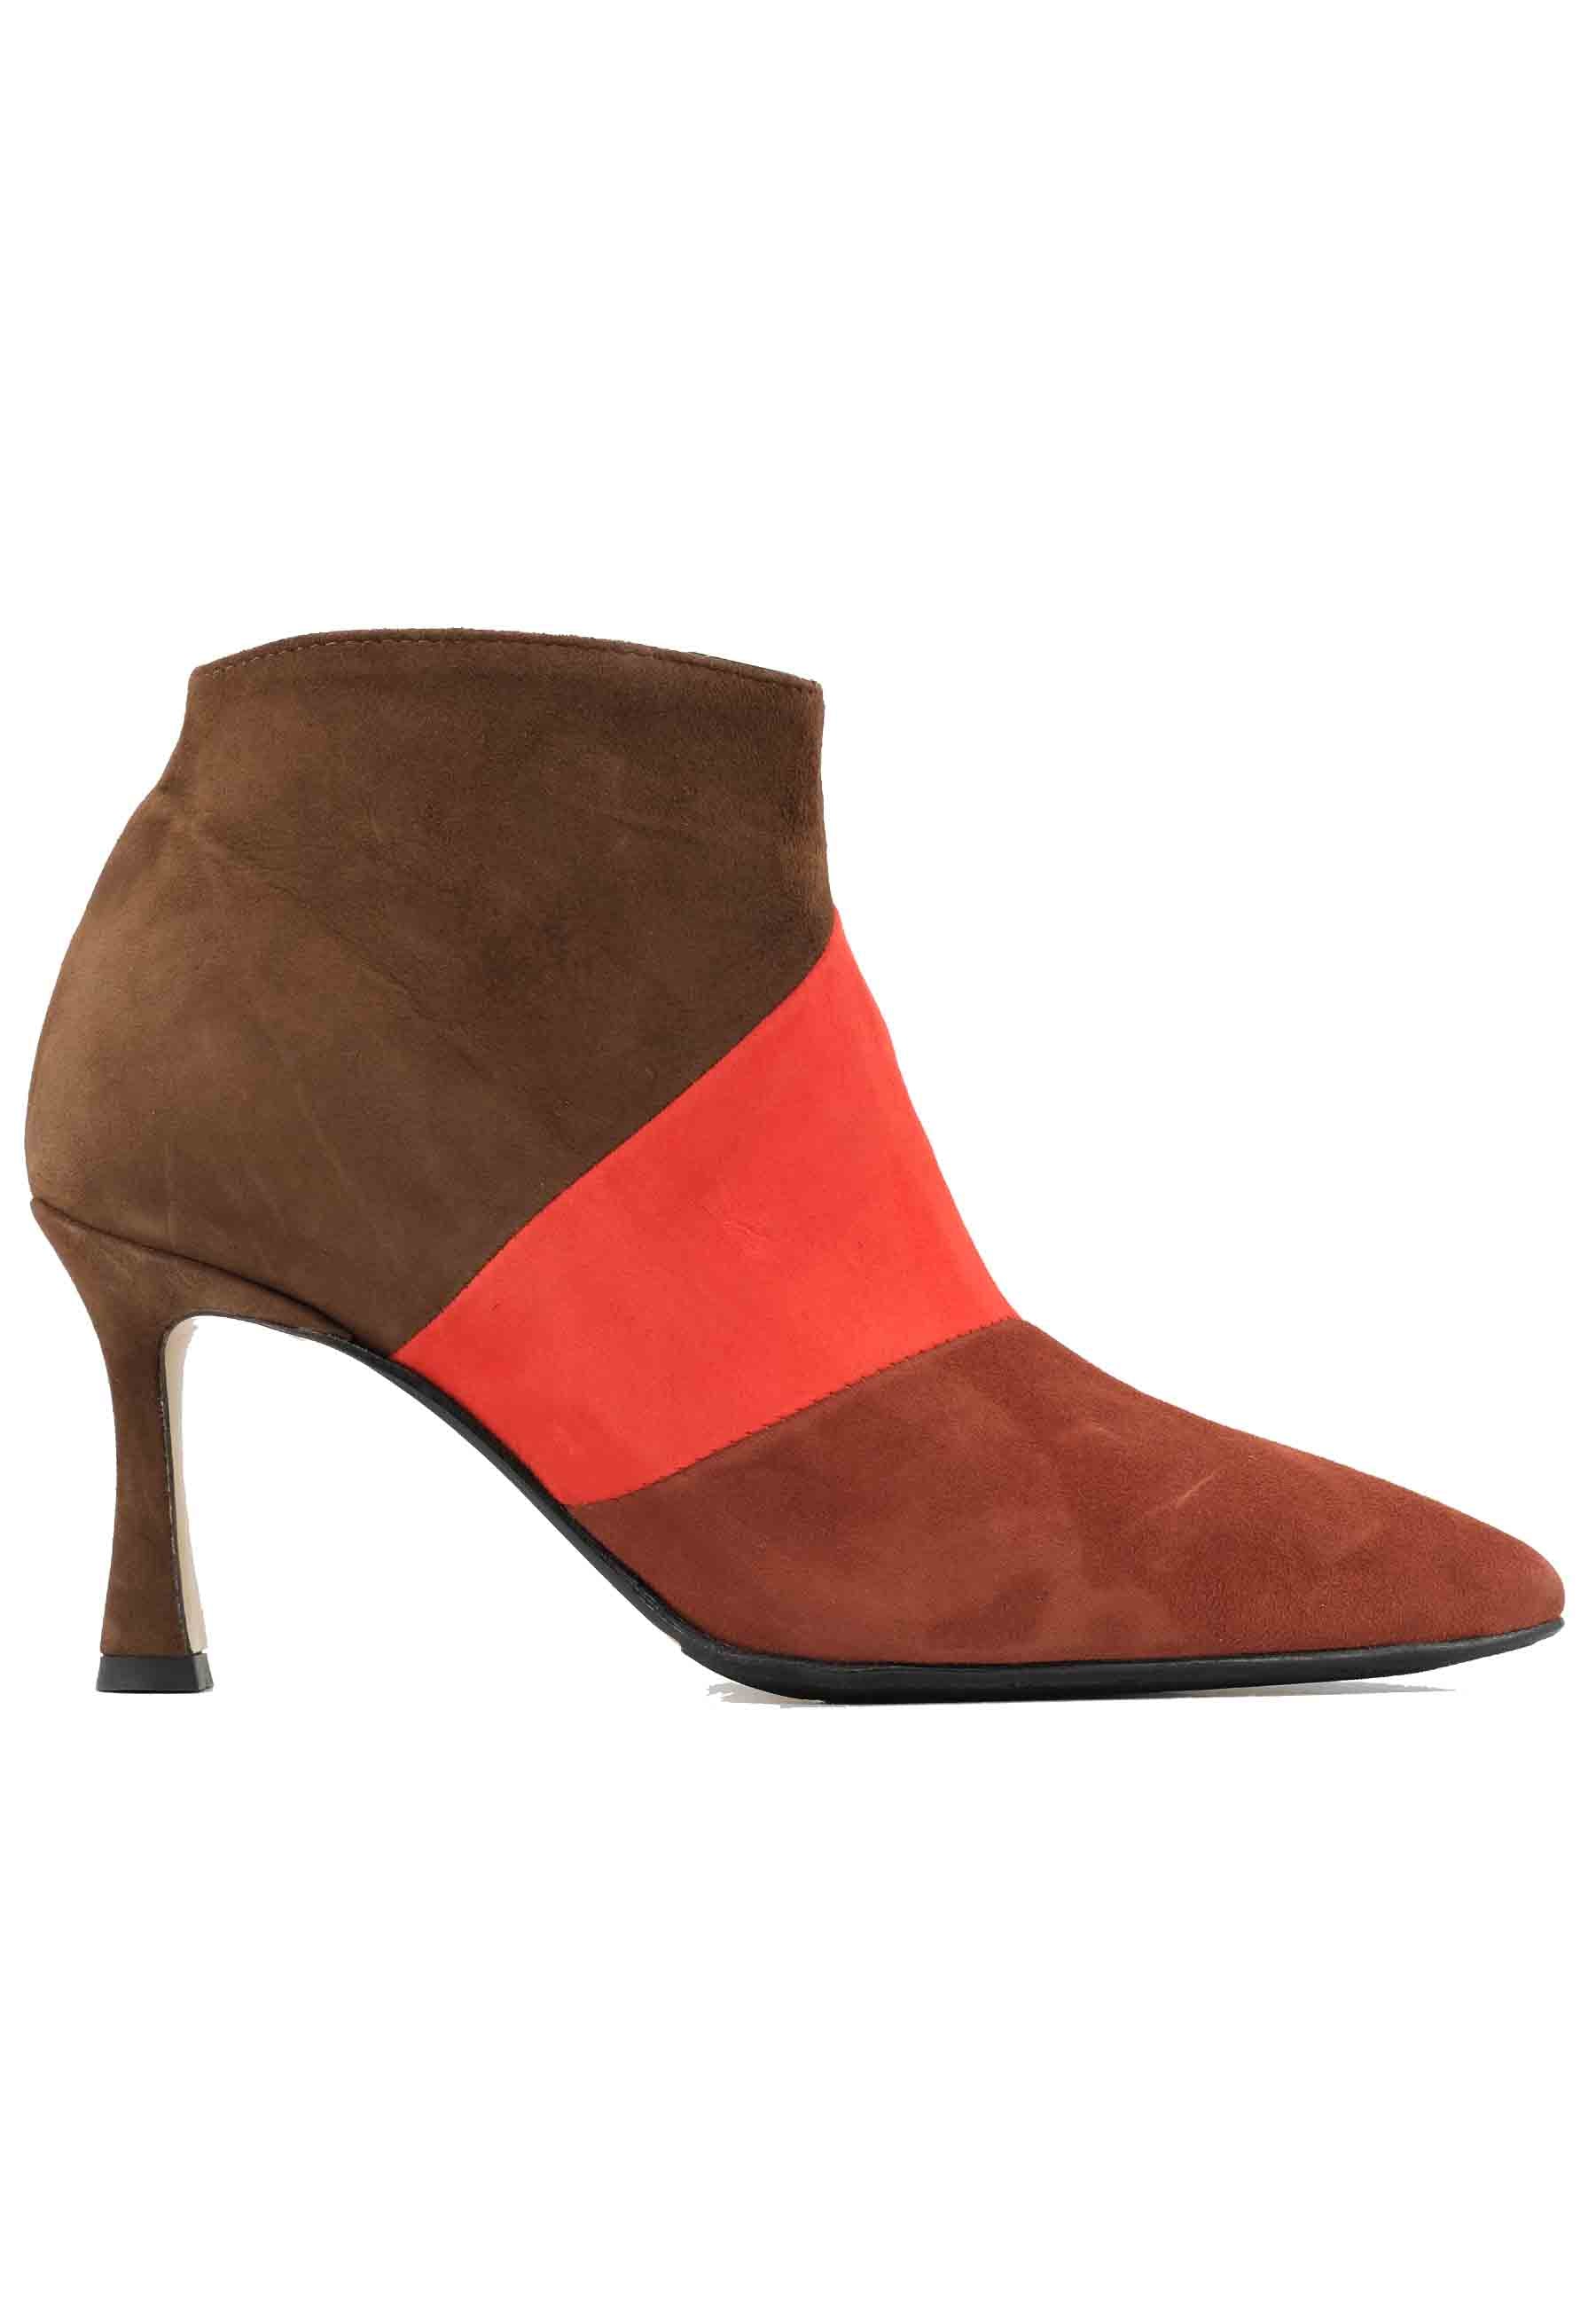 TR1672/RT ankle boots in brick suede with high heel